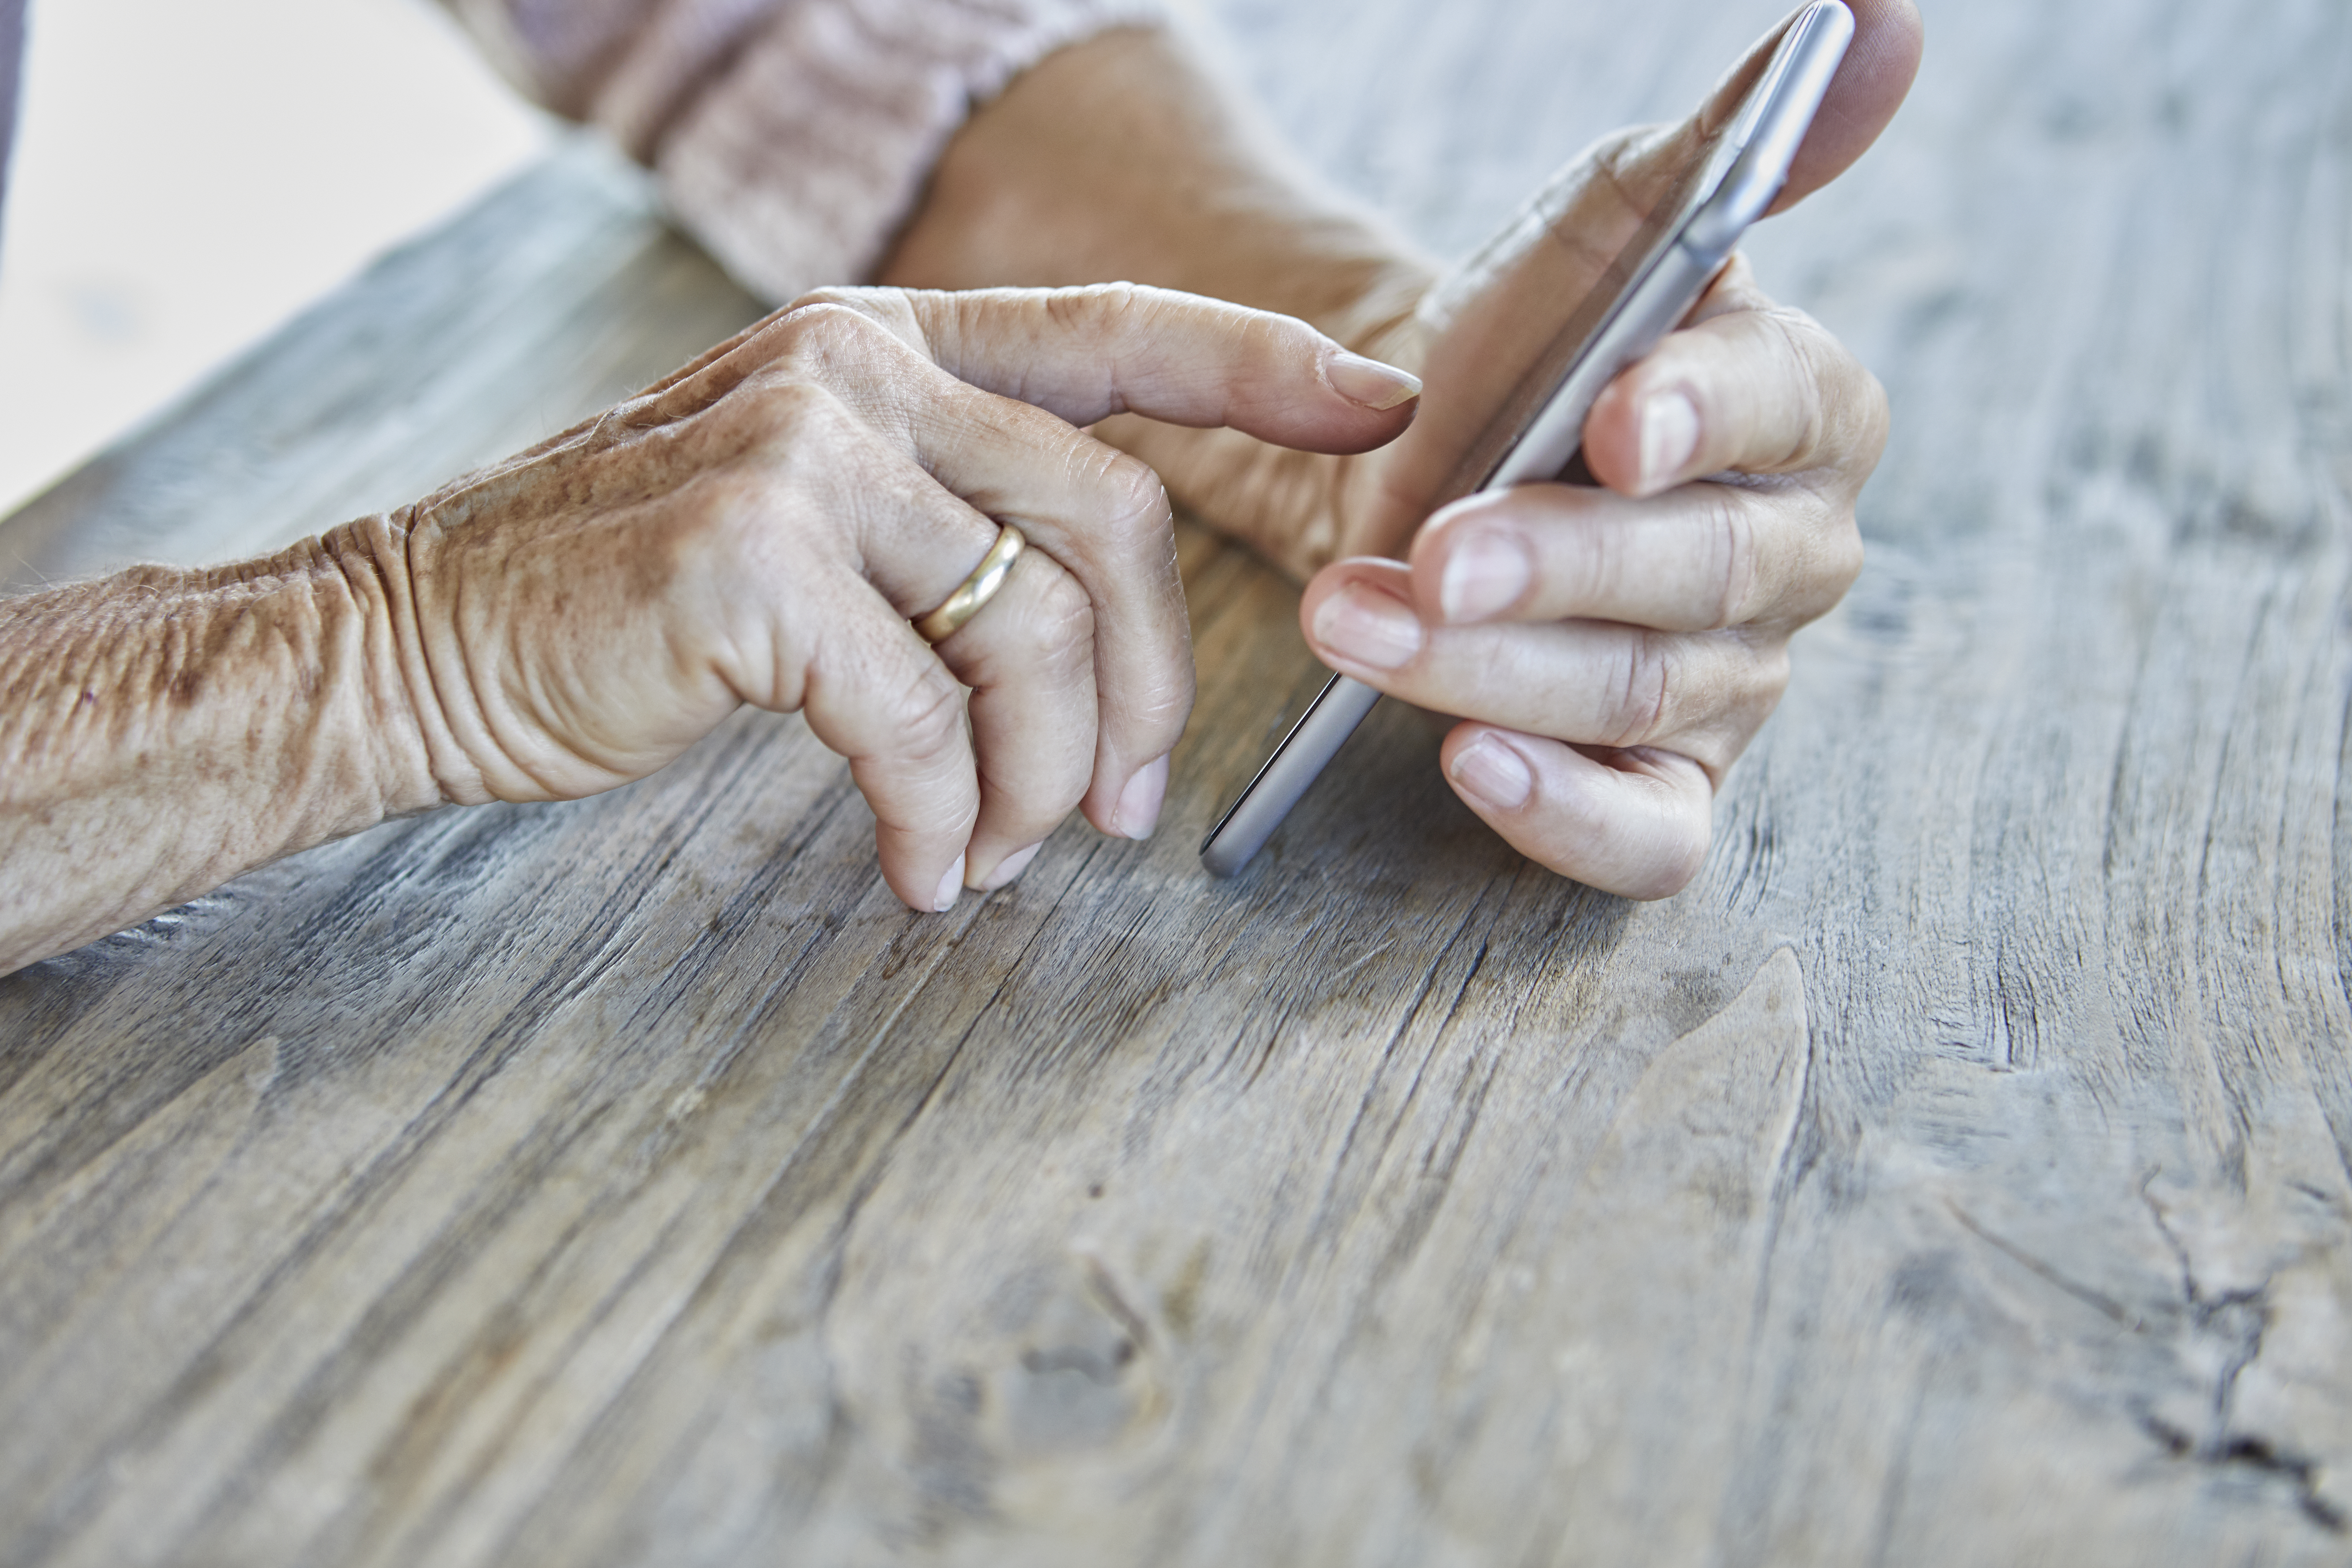 Woman's hands using smartphone, close-up | Source: Getty Images